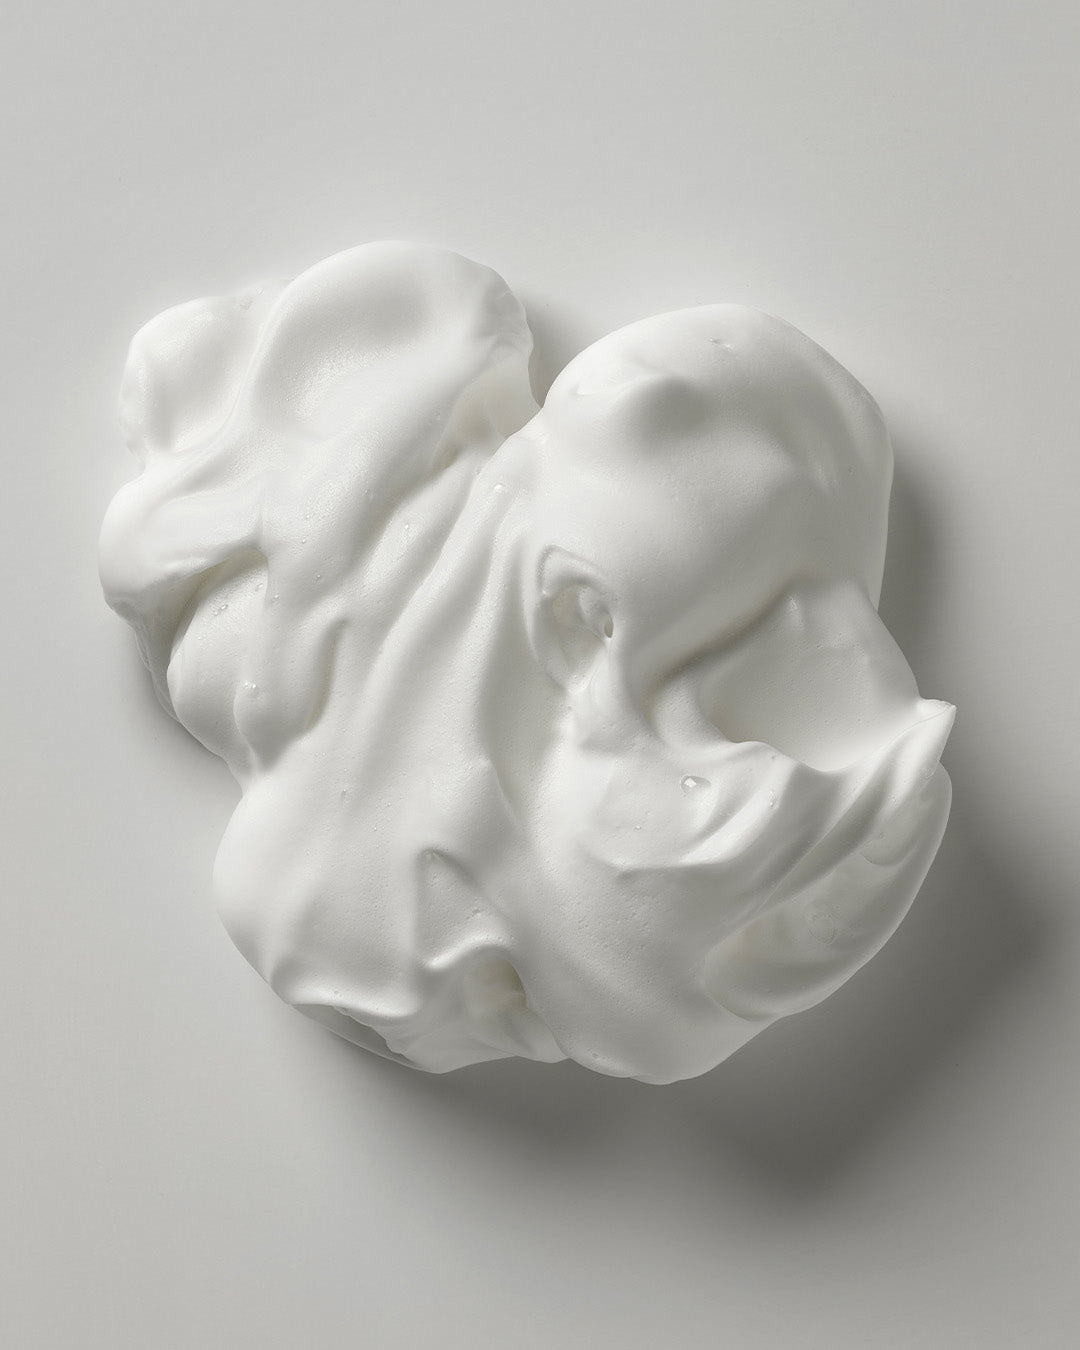 The body hybrid mousse poured onto white surface showing thick fluffy texture